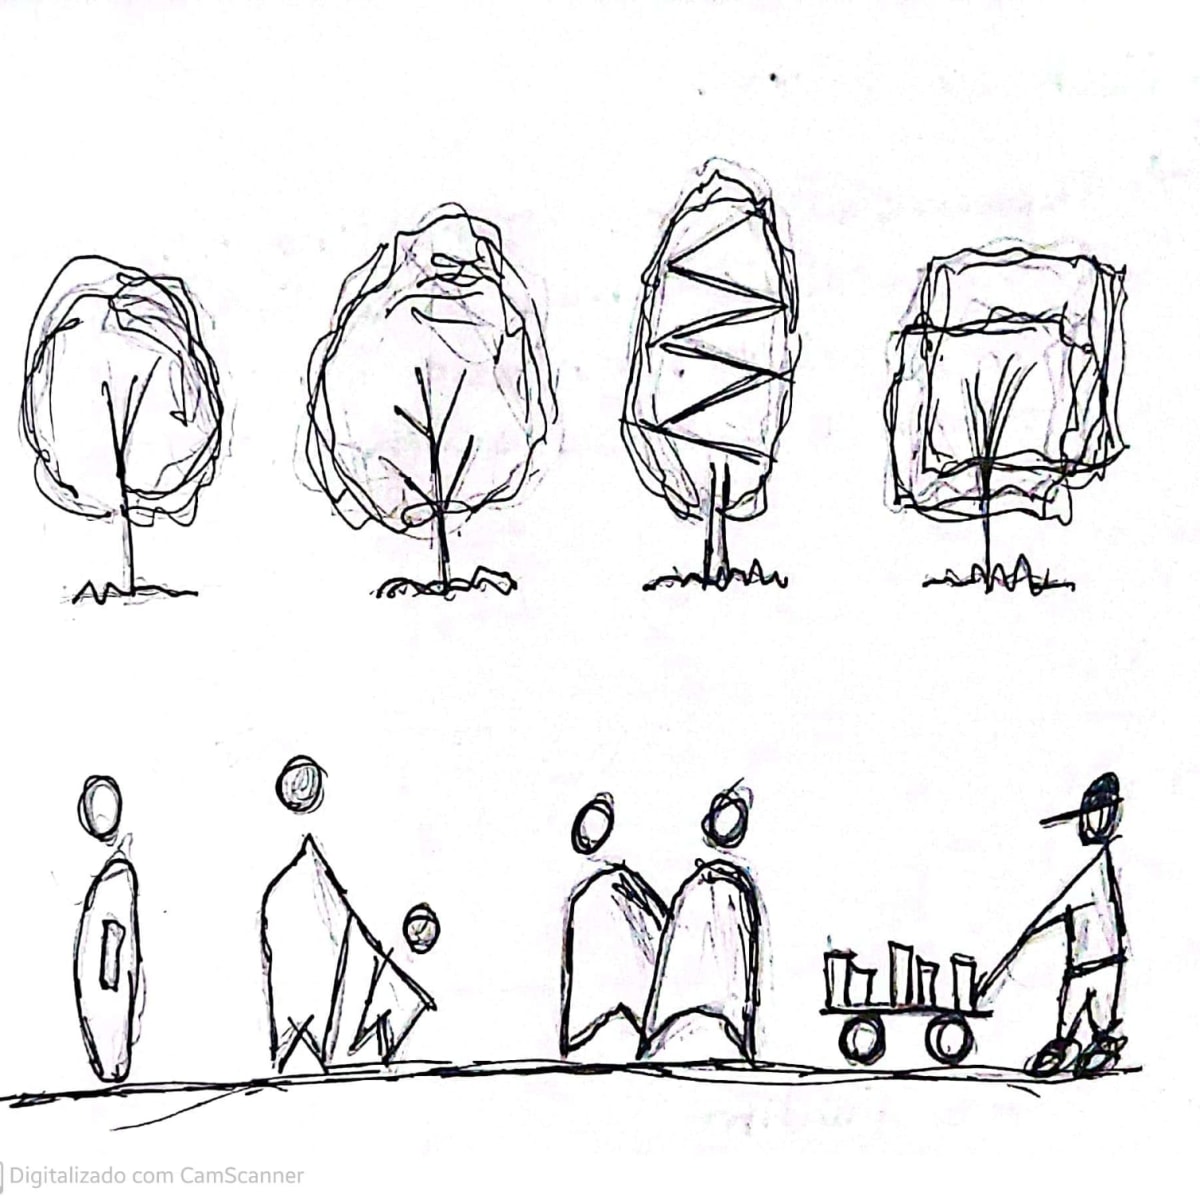 Free Hand-Sketched Human Figures | Learn Architecture Online